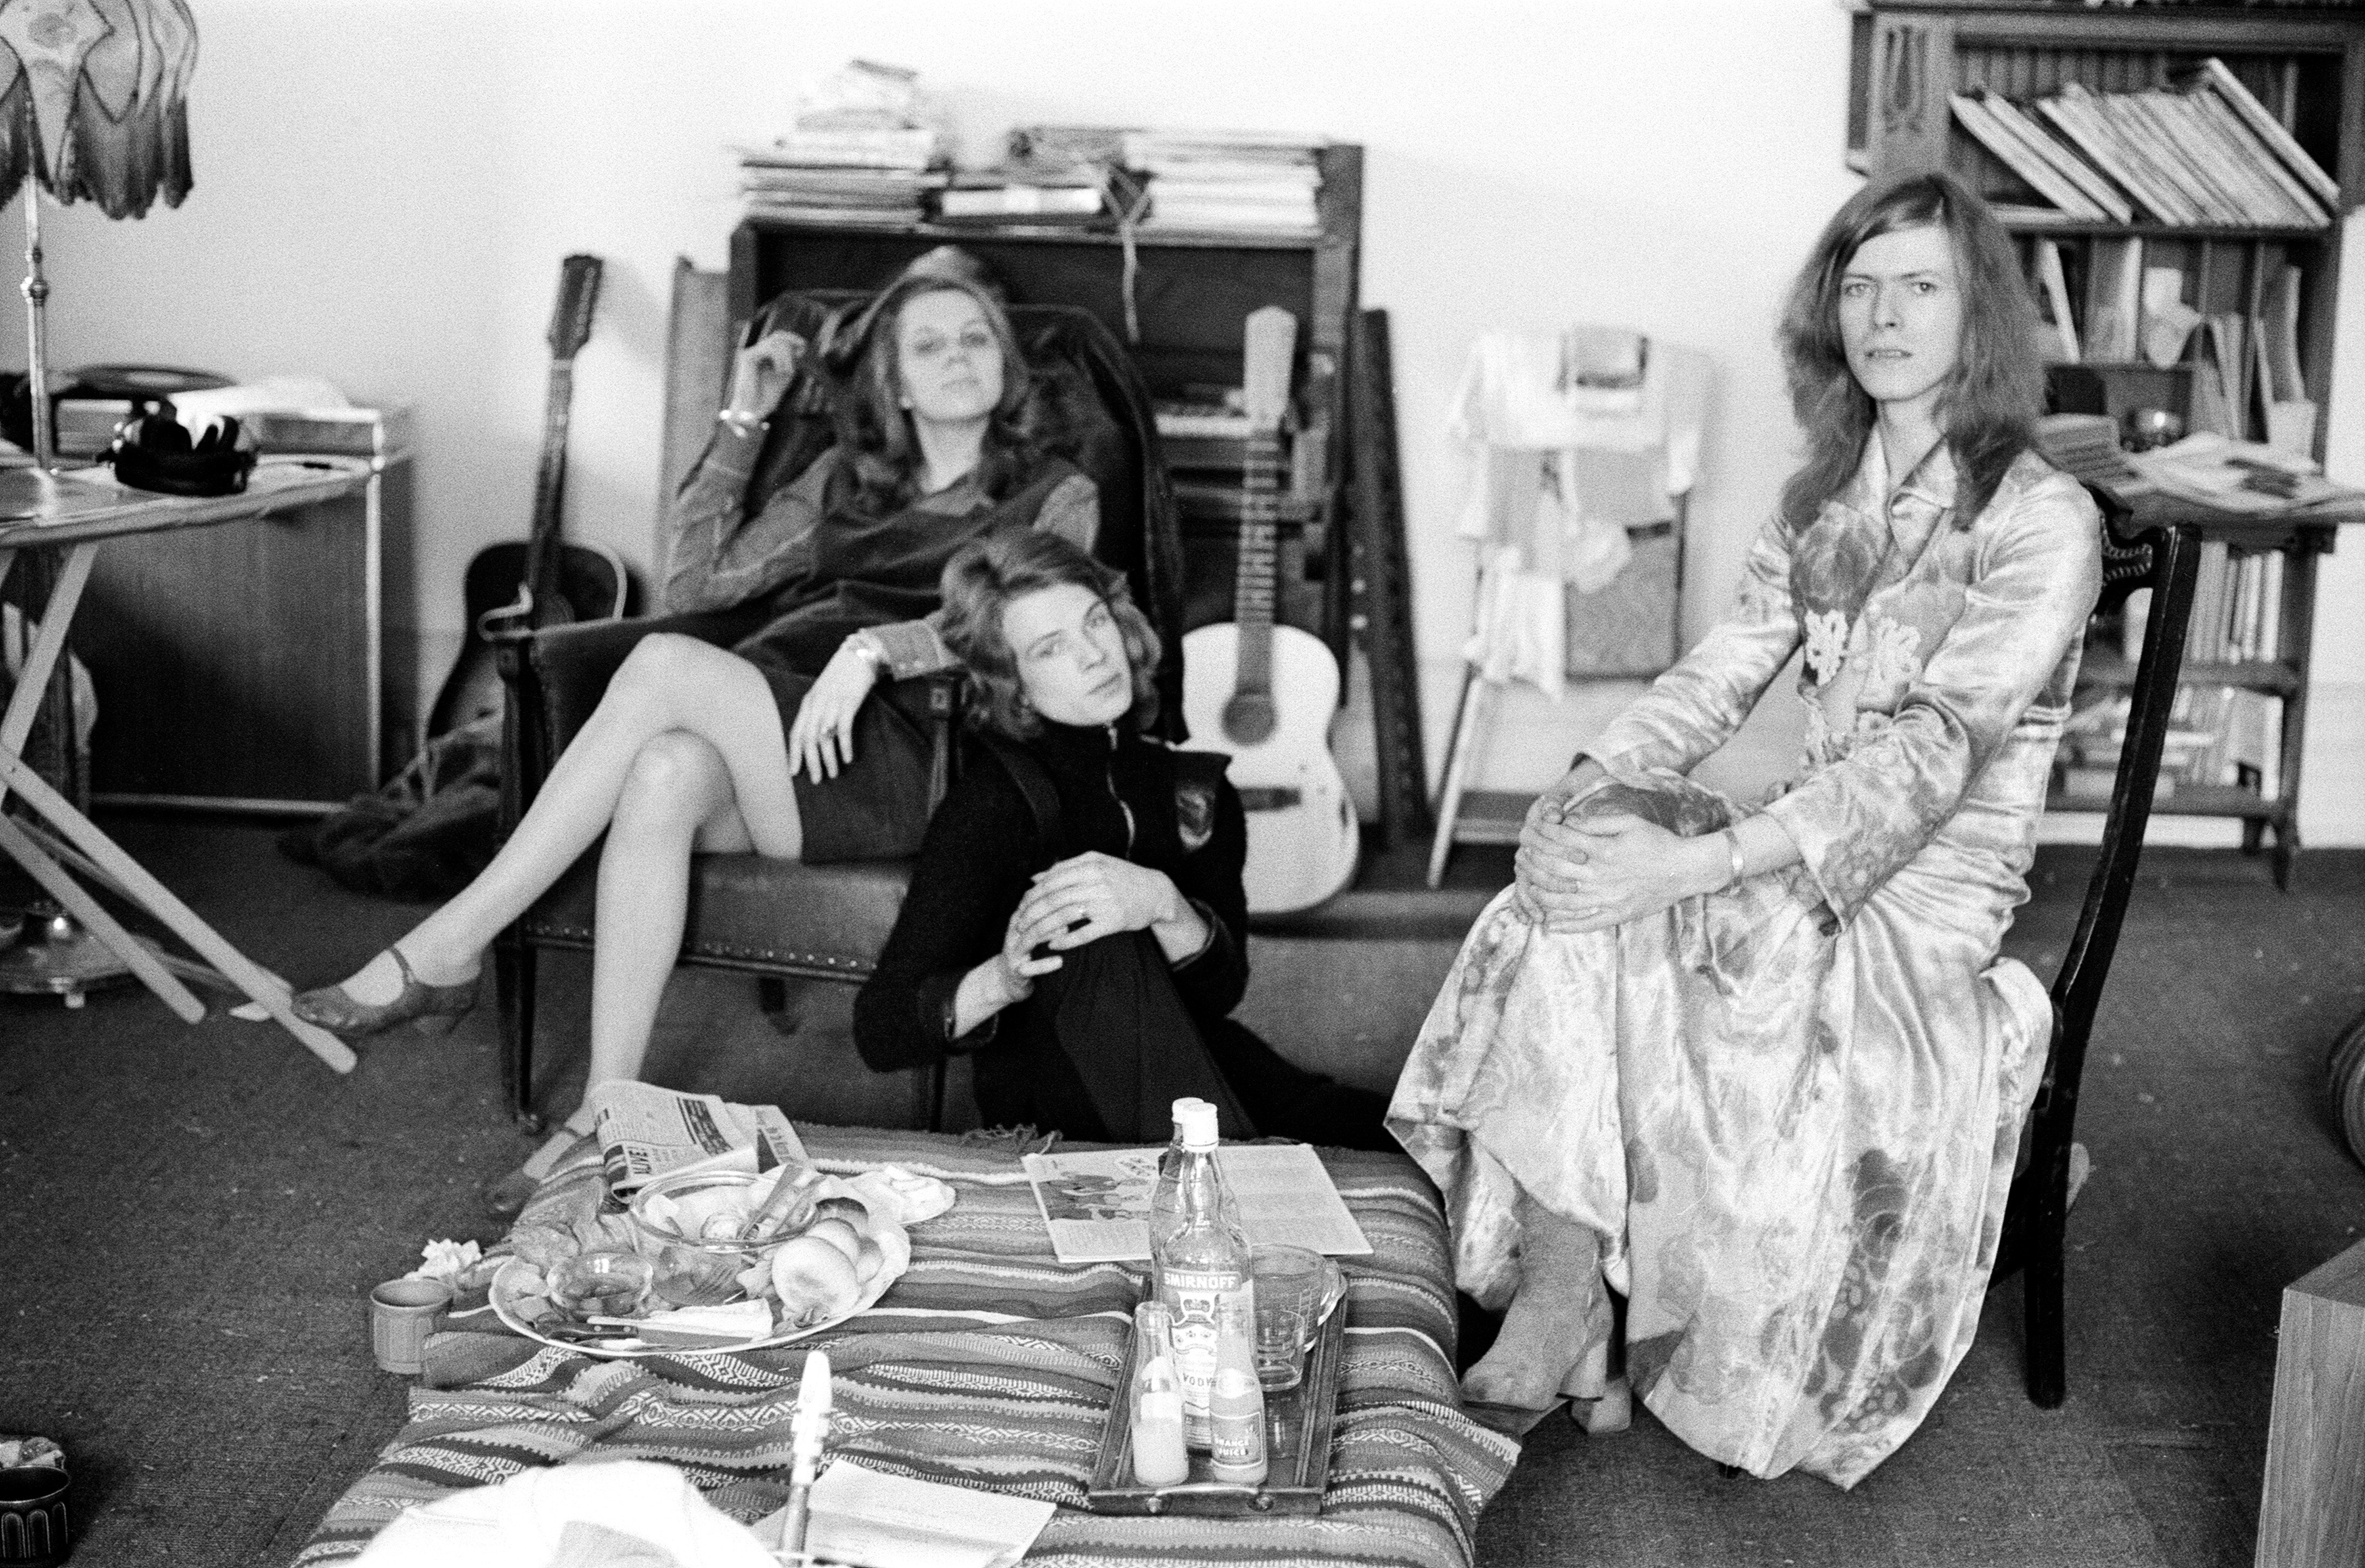 20 Apr 1971, London, England, UK --- David Bowie and wife Angie, at home, Haddon Hall, at Beckenham, Kent, 20th April 1971. --- Image by © Daily Mirror/Mirrorpix/Corbis